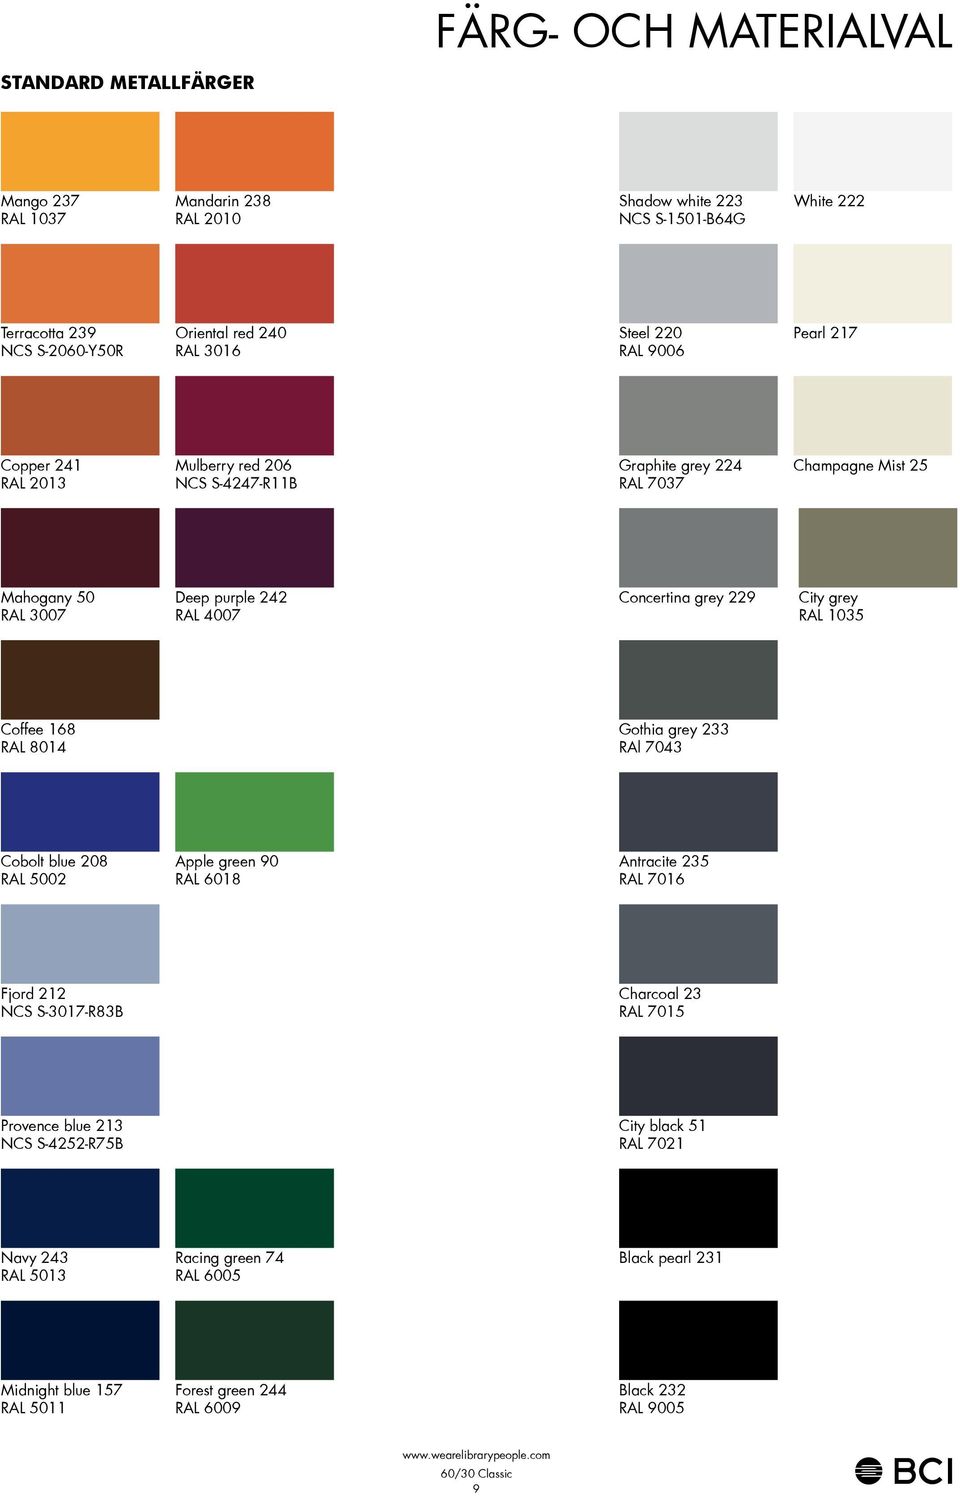 City grey RAL 05 Coffee 68 RAL 80 Gothia grey RAl 70 Cobolt blue 08 RAL 500 Apple green RAL 608 Antracite 5 RAL 706 Fjord NCS S-7-R8B Charcoal RAL 705